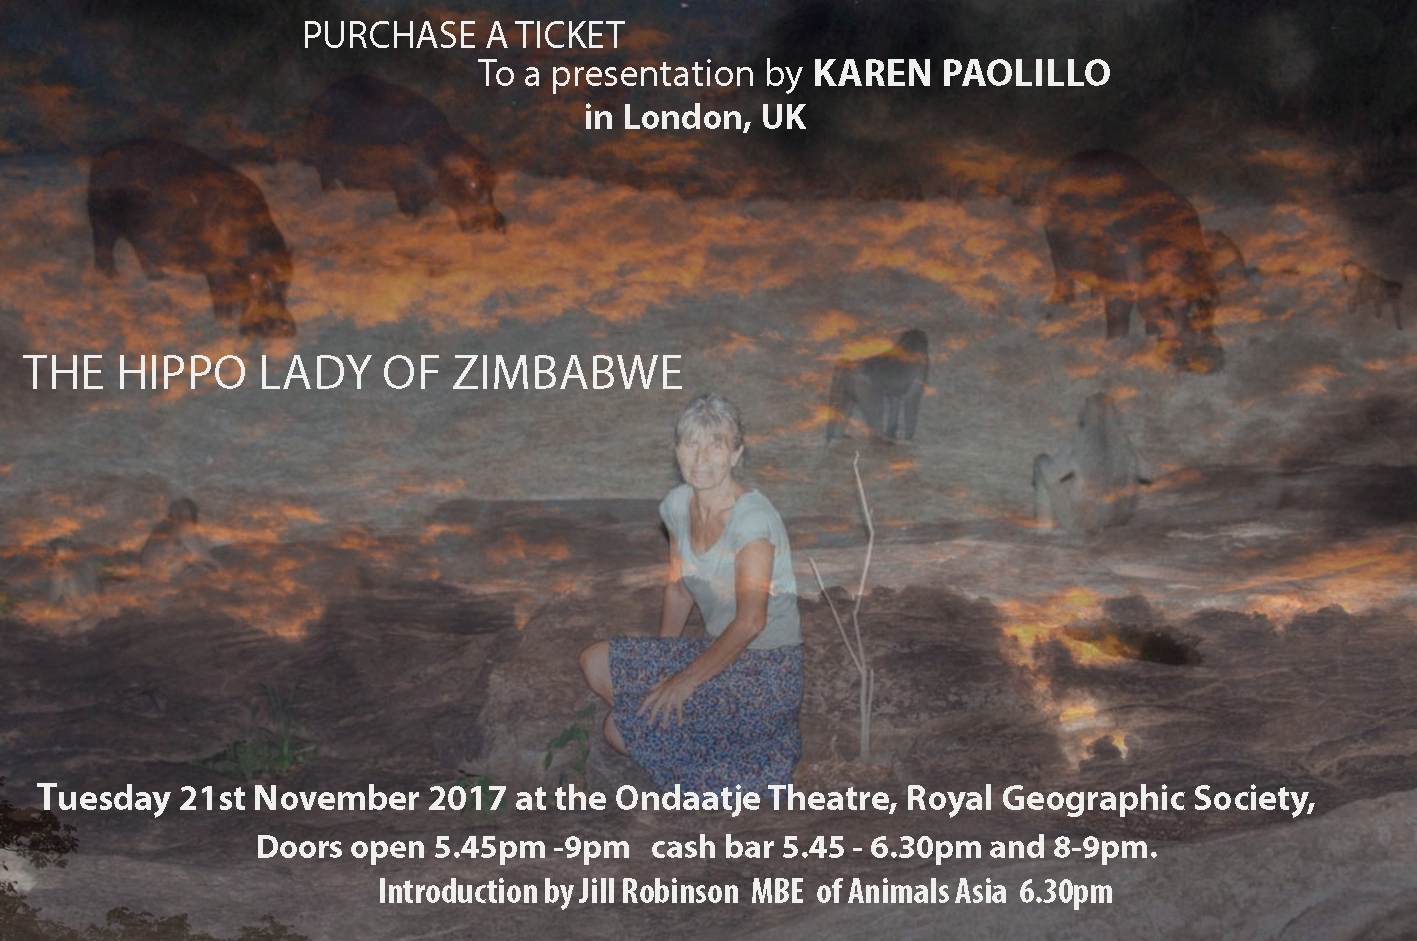 The Hippo Lady of Zimbabwe at Ondaatje Theatre in LONDON, Nov 21st, 2017